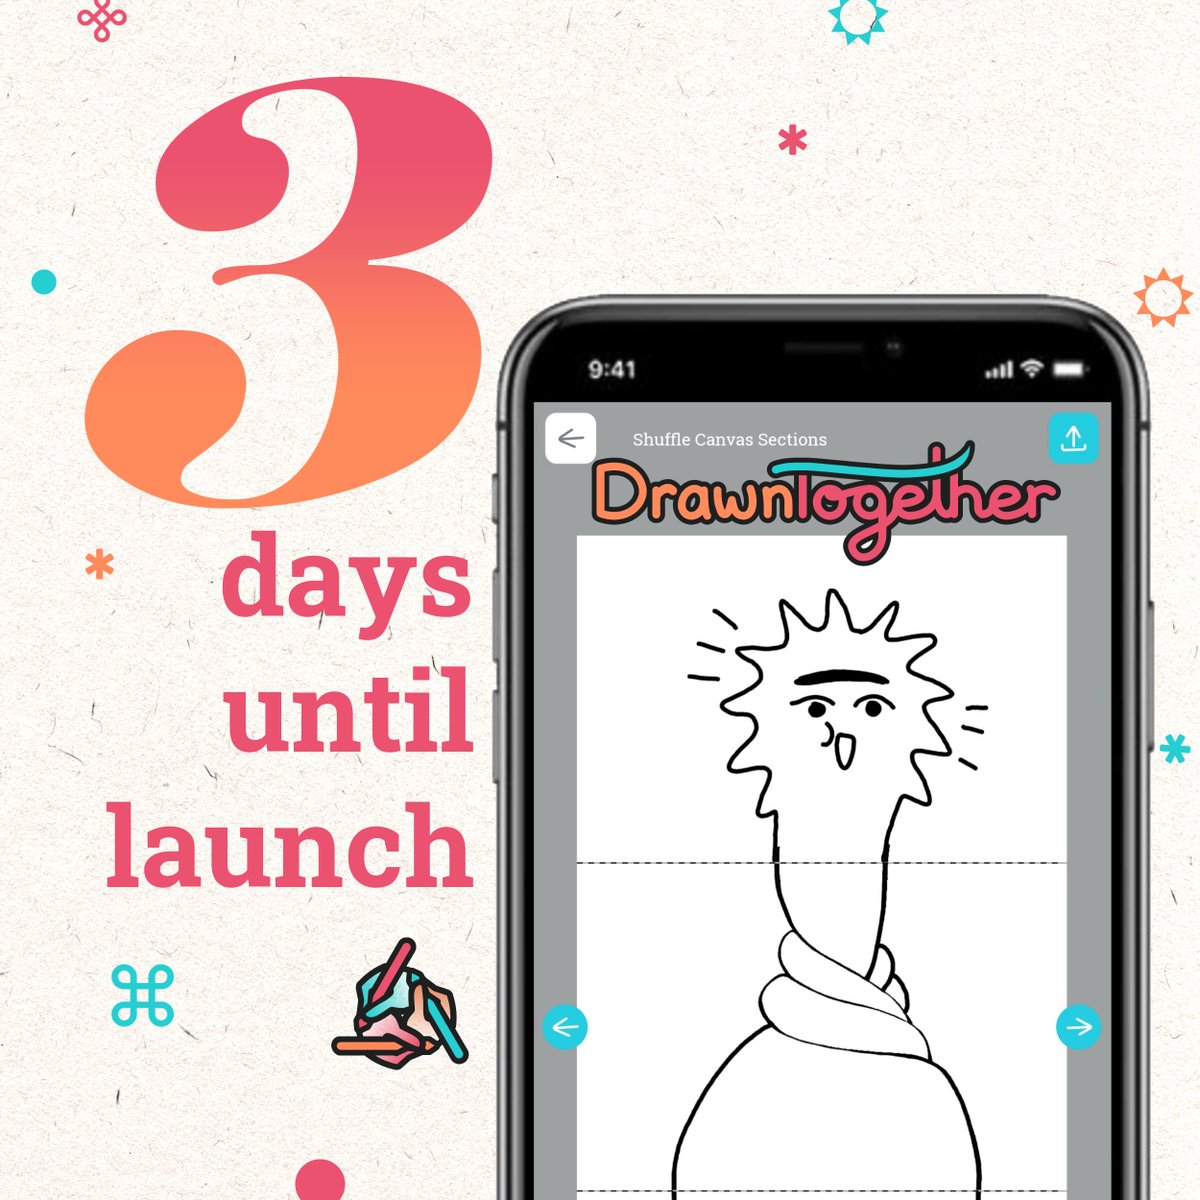 BIG NEWS HITTING YOUR FEED IN 3 DAYS! 
-
-
-
#exquisitecorpse #artapp #collaborativeart #drawntogetherapp #drawntogether #announcement #torontotech